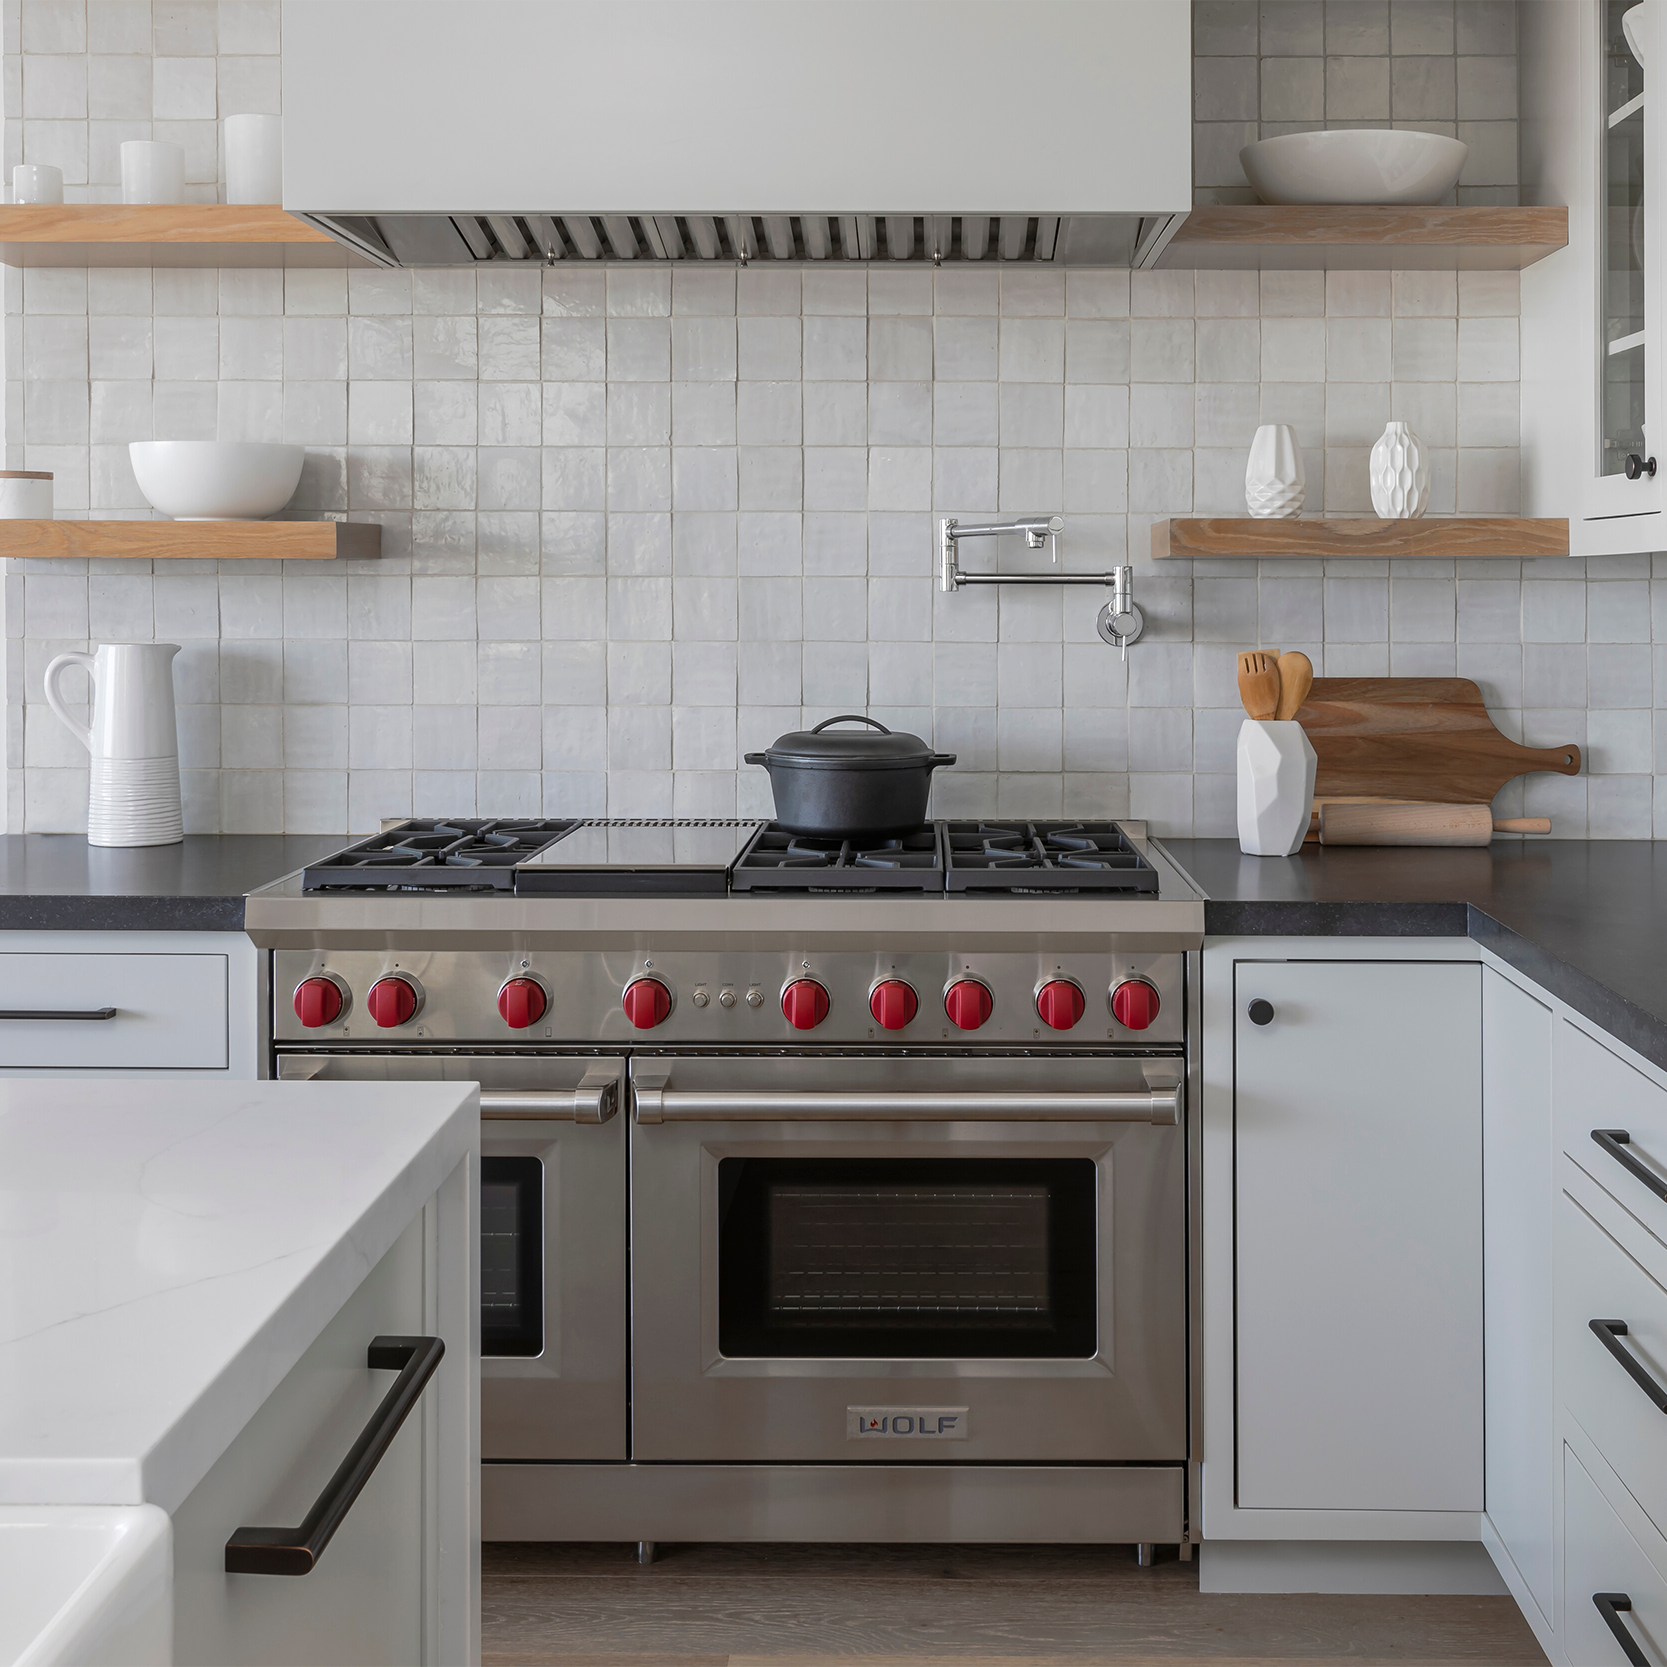 Save time and stress by starting your kitchen design with appliance selection